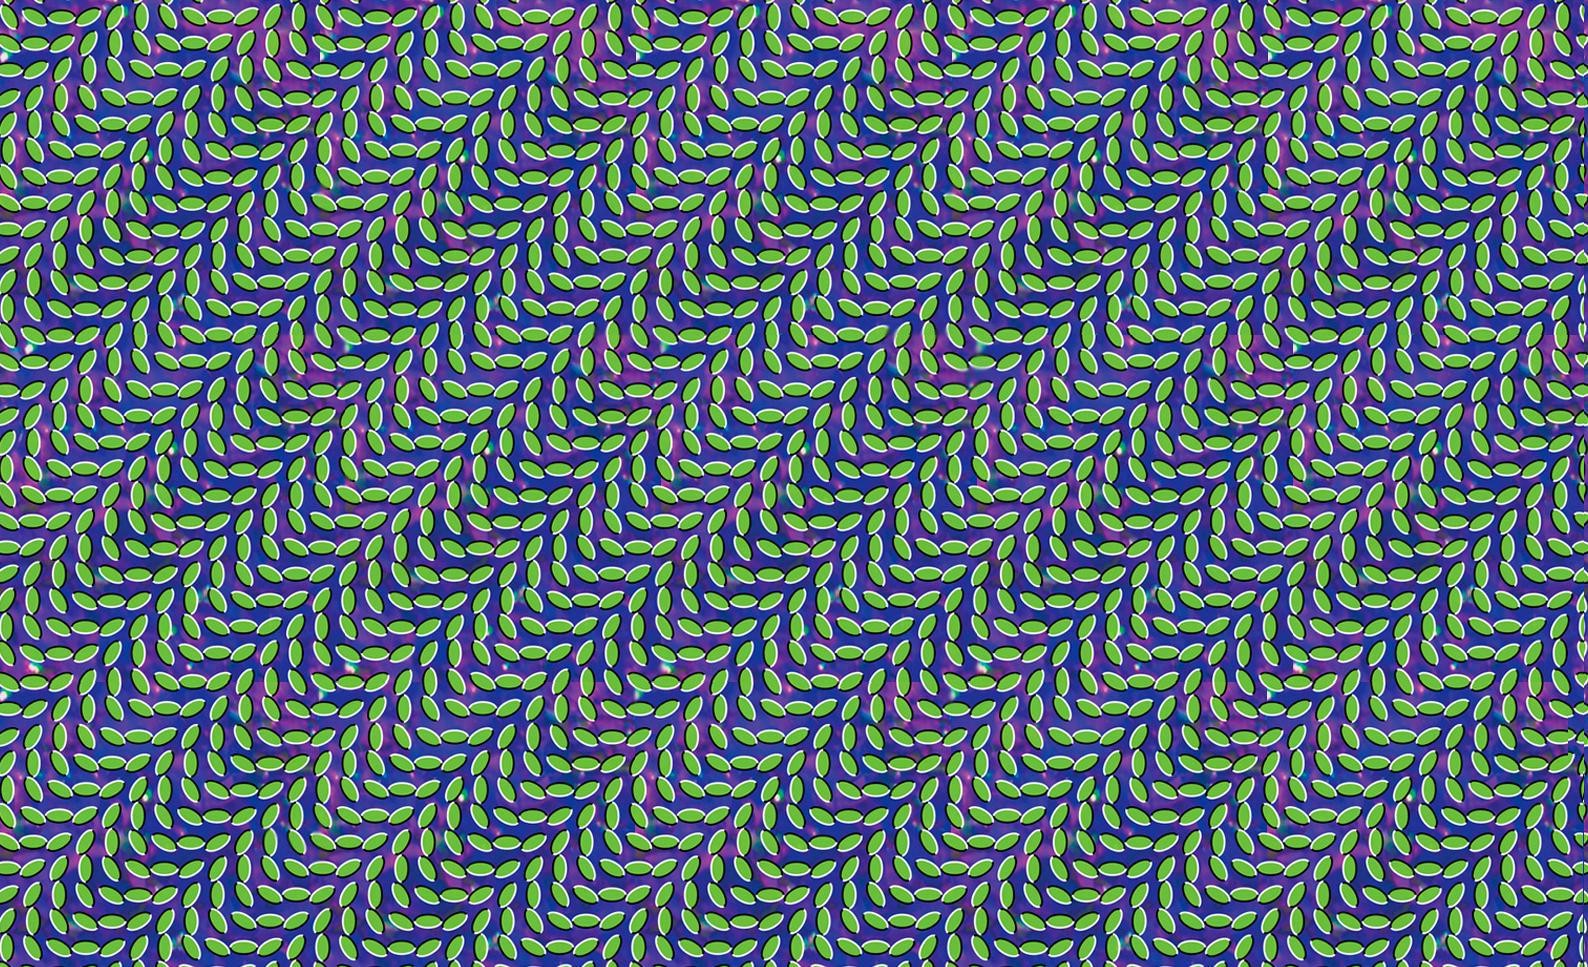 optical Illusion, Pattern, Abstract, Leaves, Animal Collective, Merriweather Post Pavilion Wallpaper